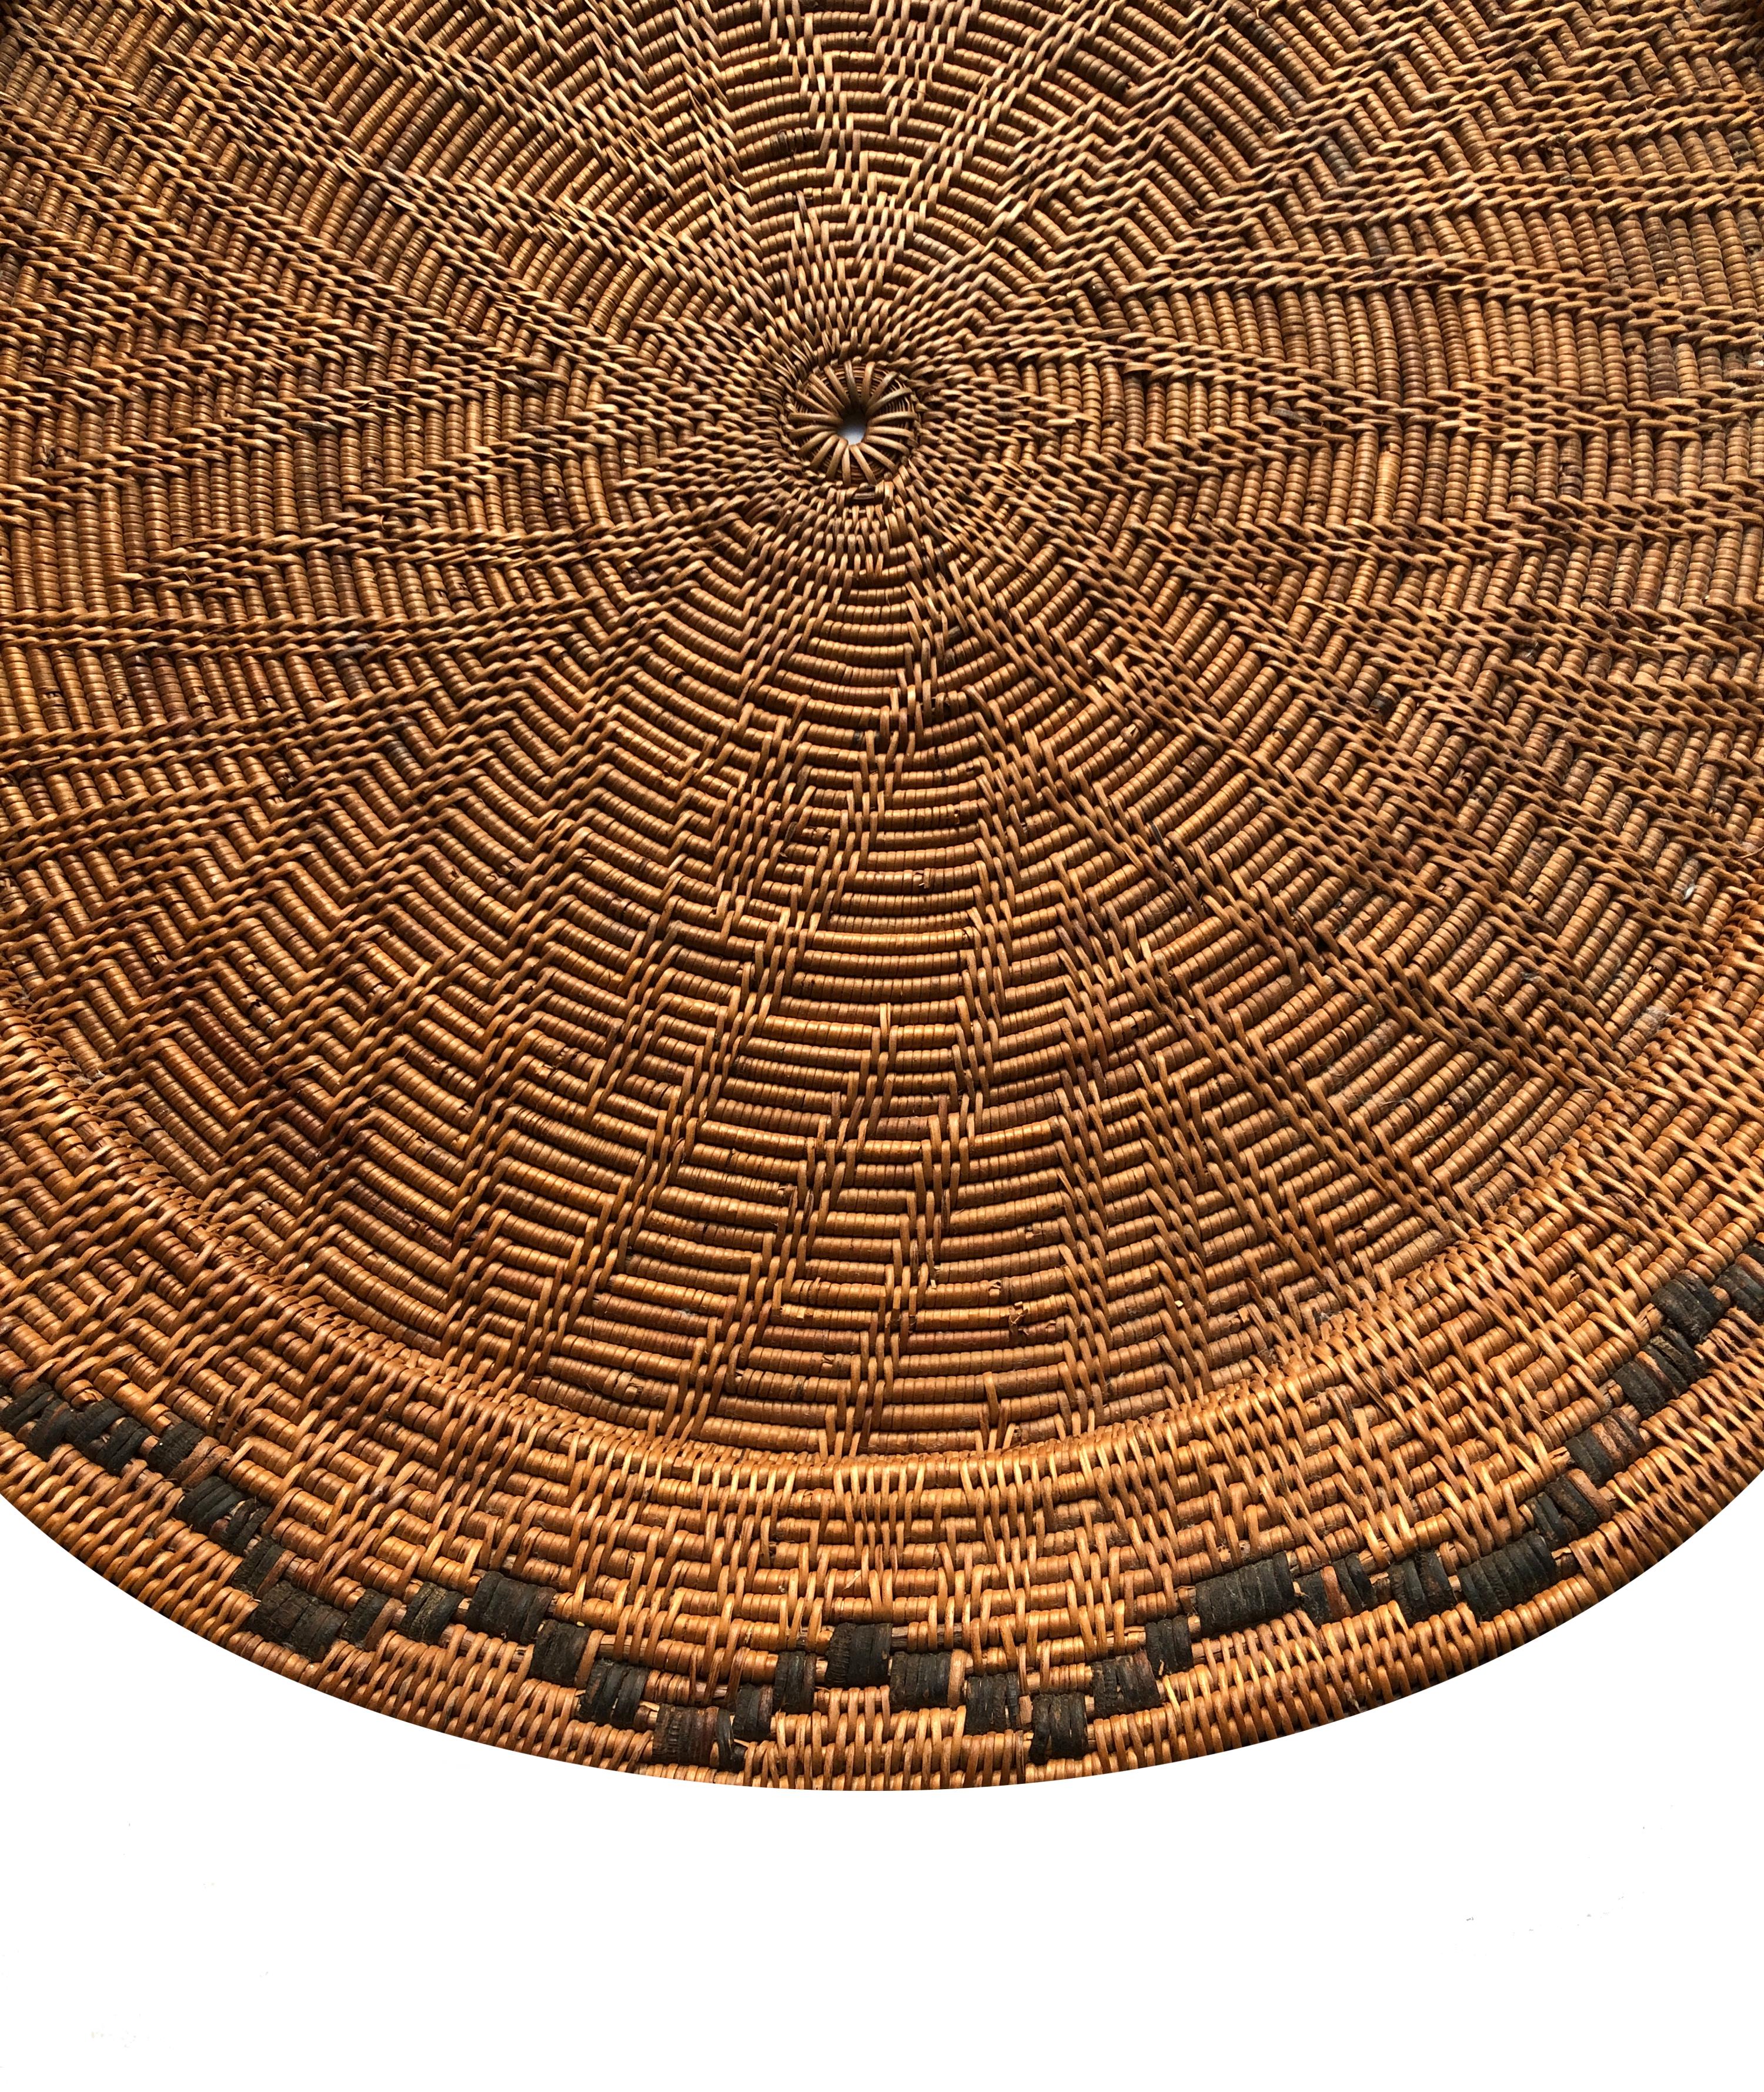 Twig Swedish Folk Art Handcrafted Round Serving Tray For Sale